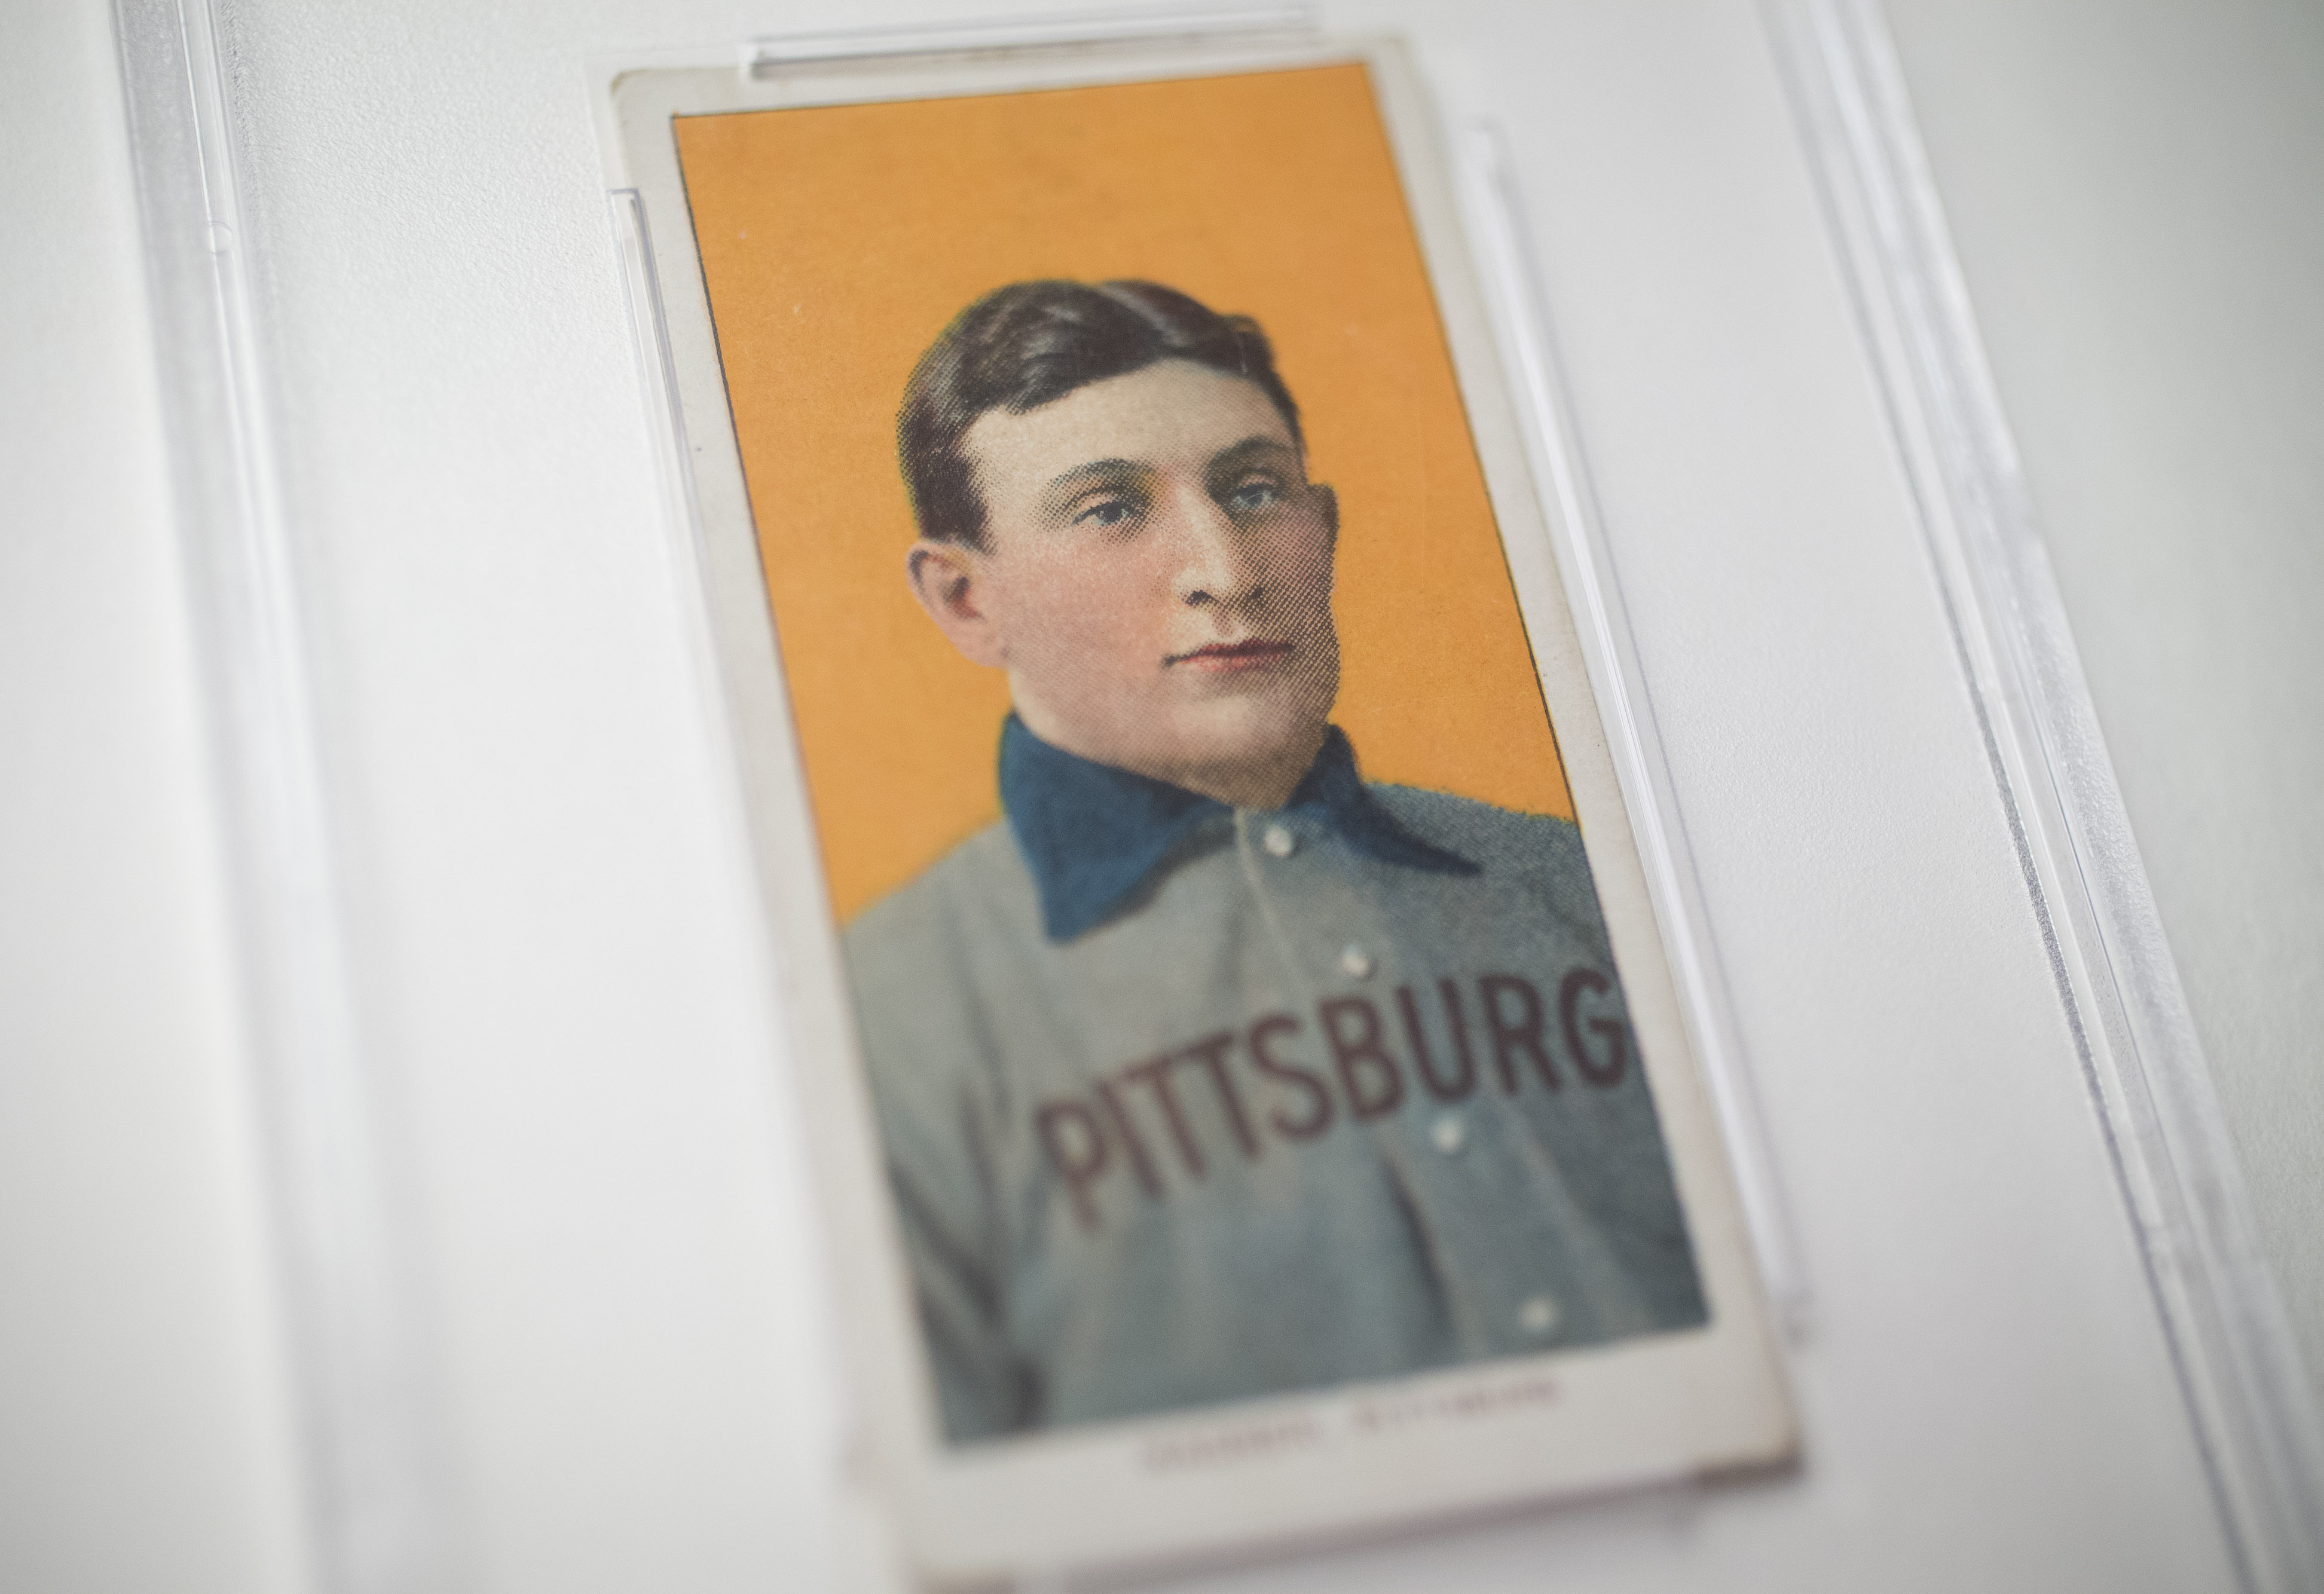 Honus Wagner T206 Card with Sides Cut Off Sells for $1.5M at Auction, News, Scores, Highlights, Stats, and Rumors